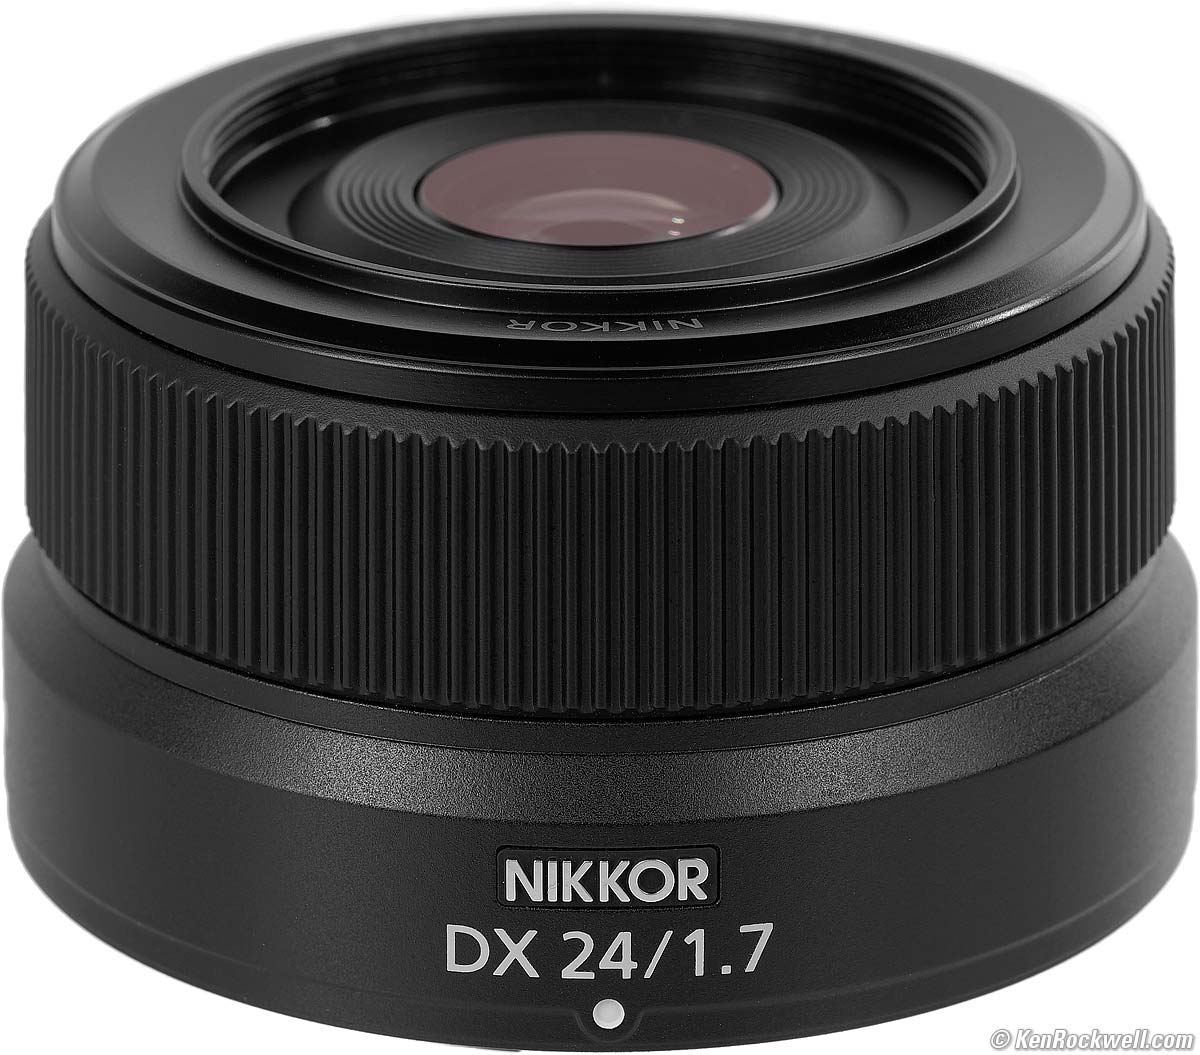 Nikon Z 24mm f/1.7 DX Review & Sample Images by Ken Rockwell